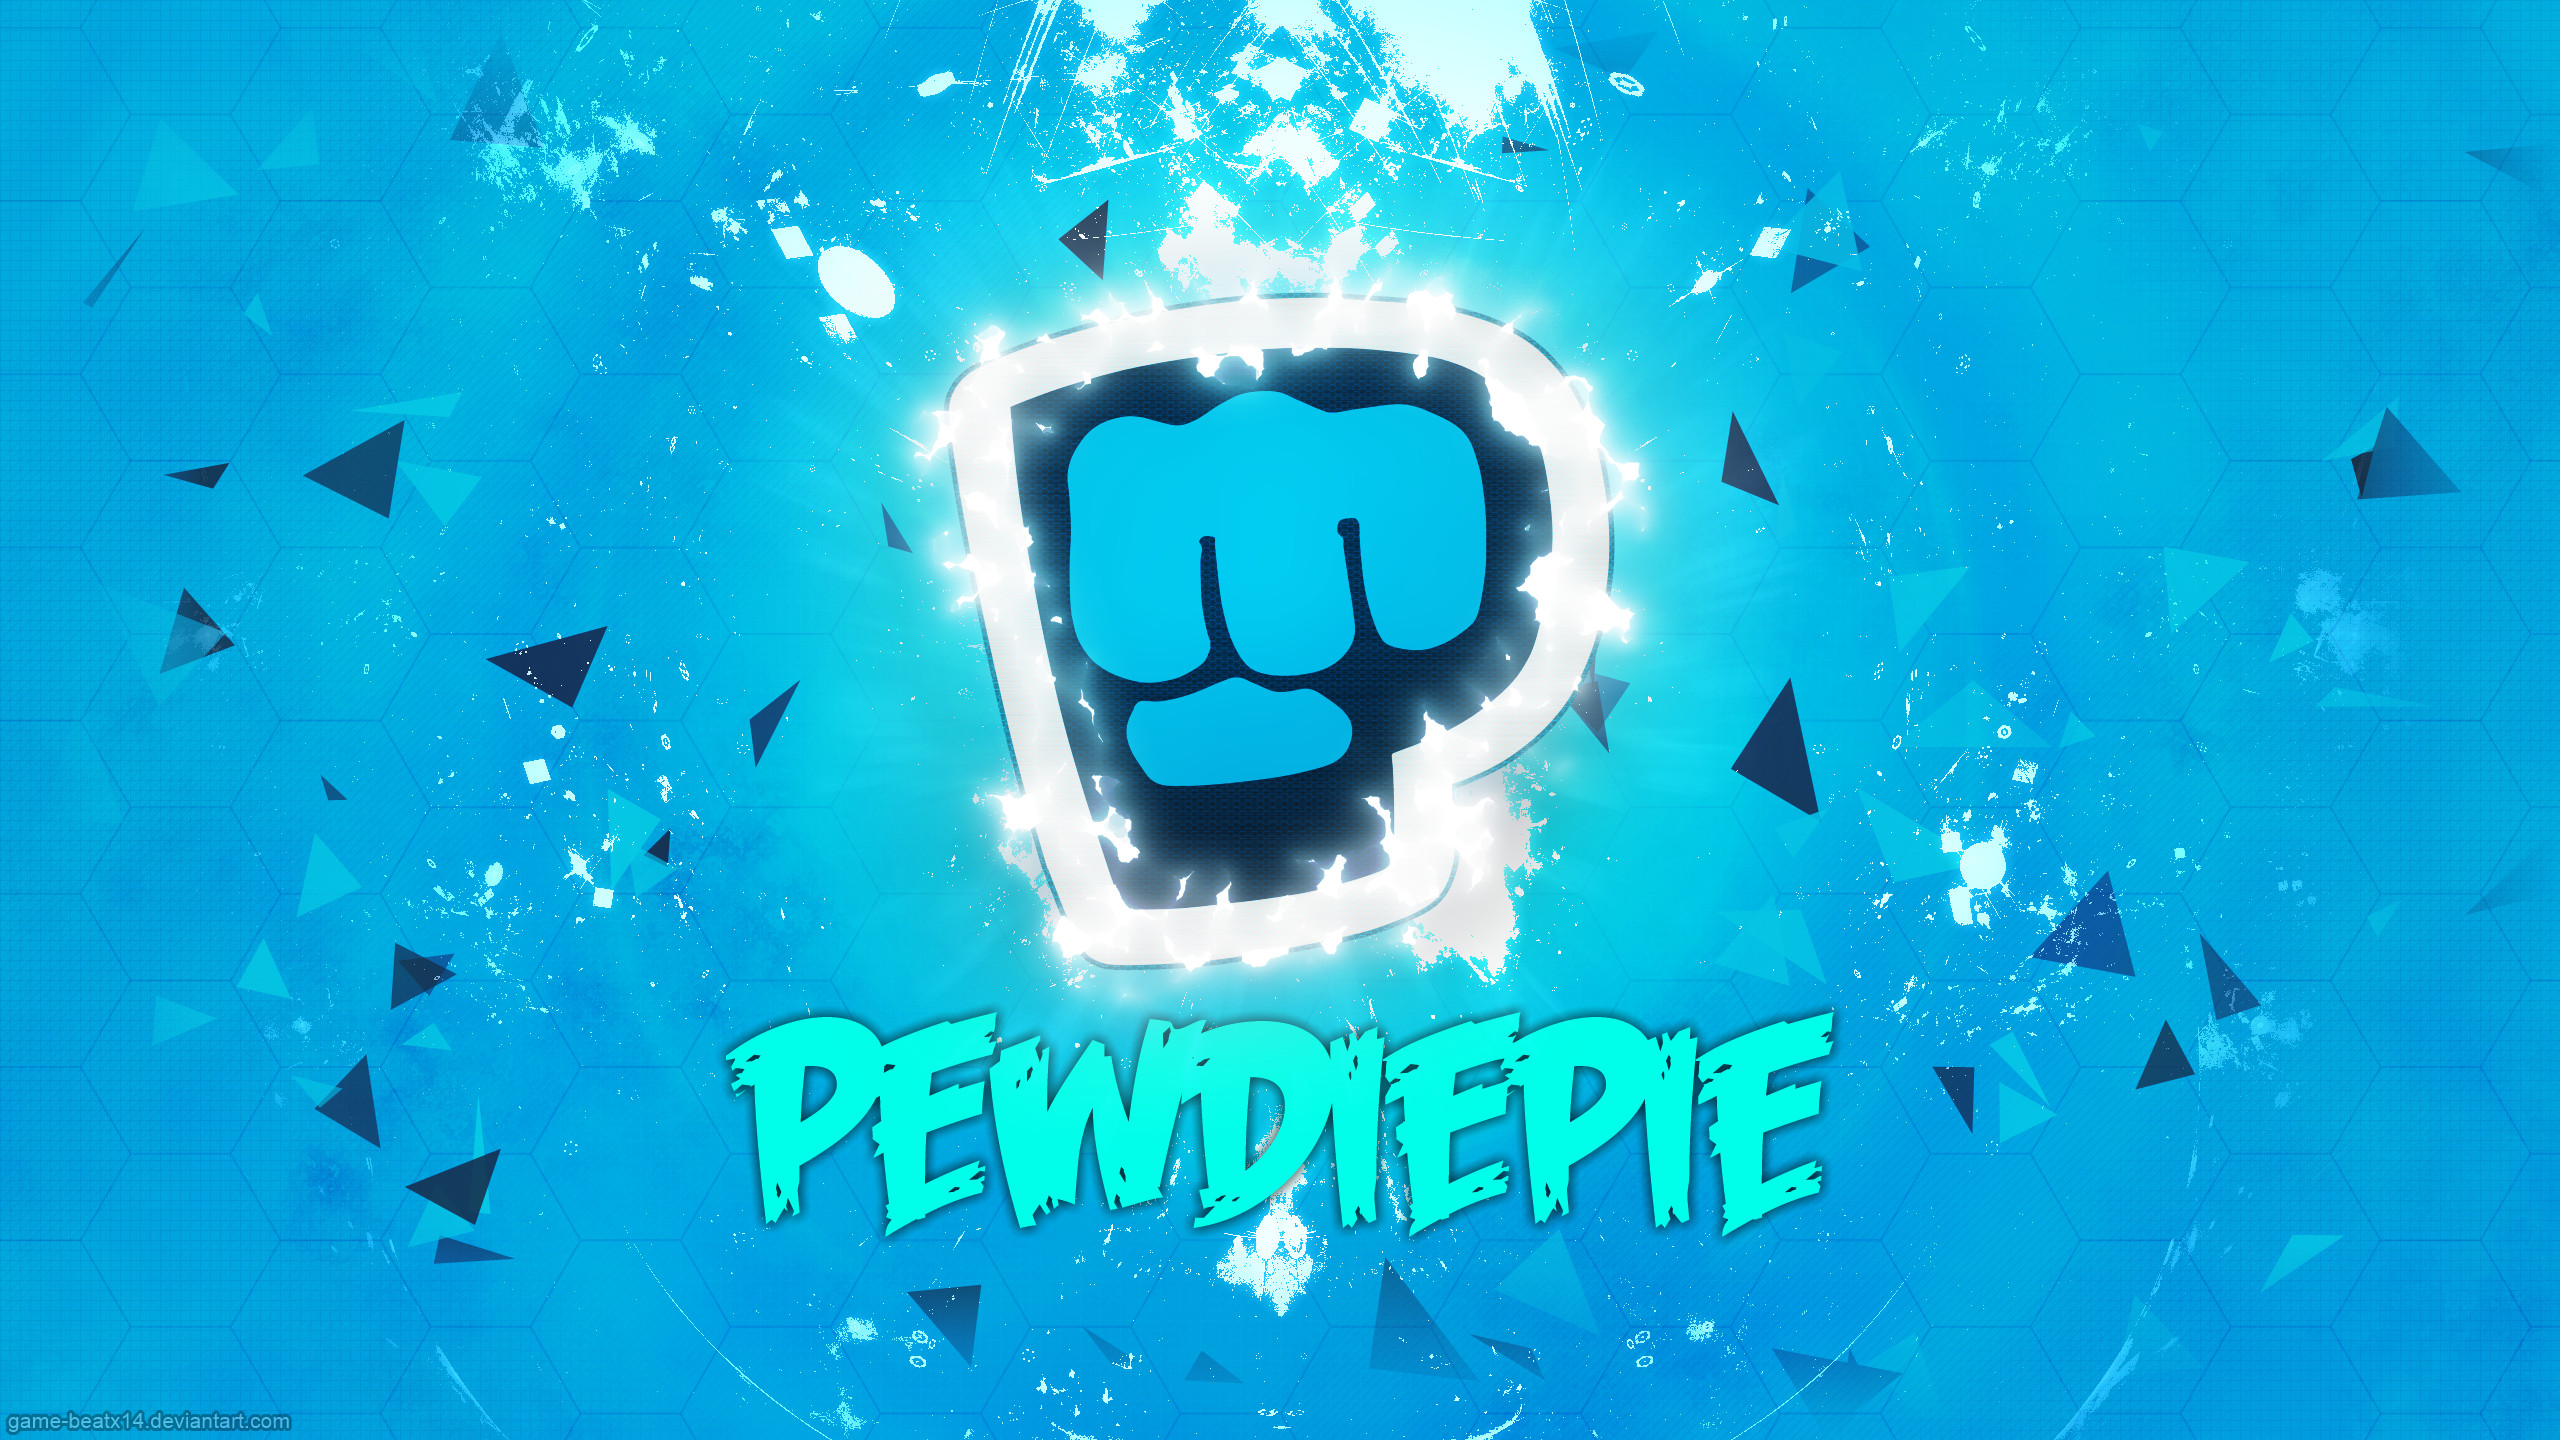 2560x1440 pewdiepie wallpaper by game beatx14 fan art wallpaper other recently  